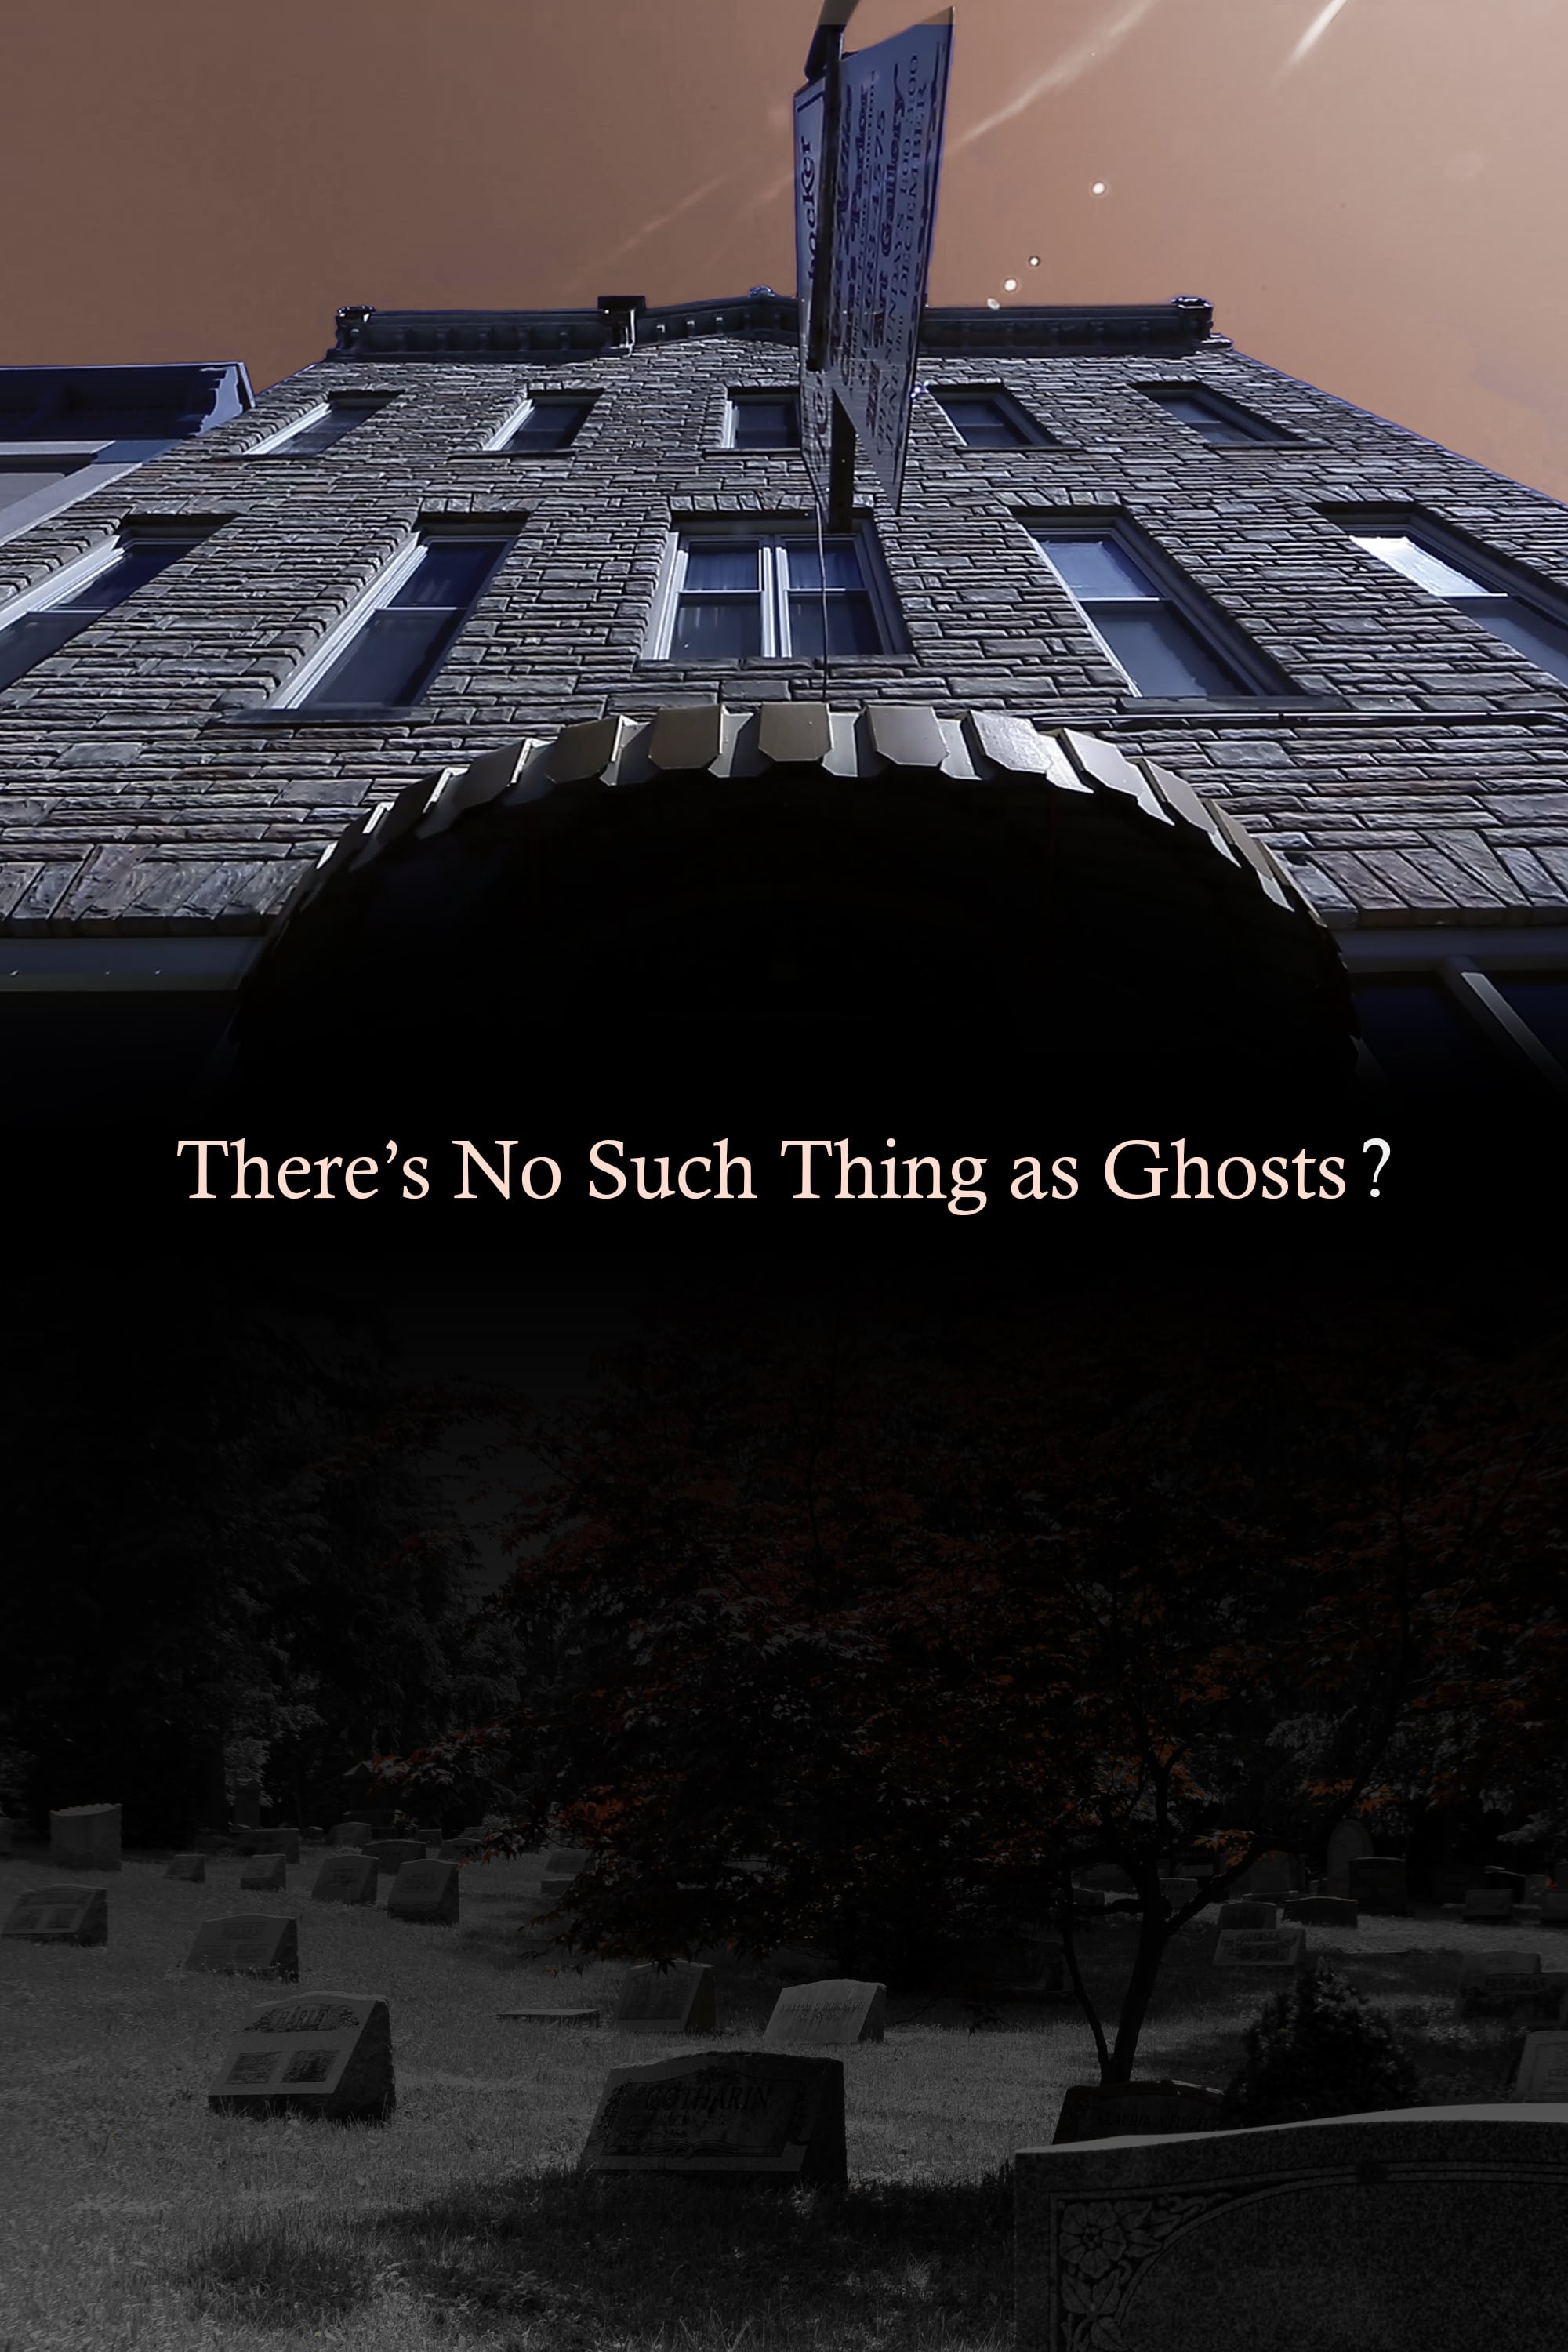 There’s No Such Thing as Ghosts?